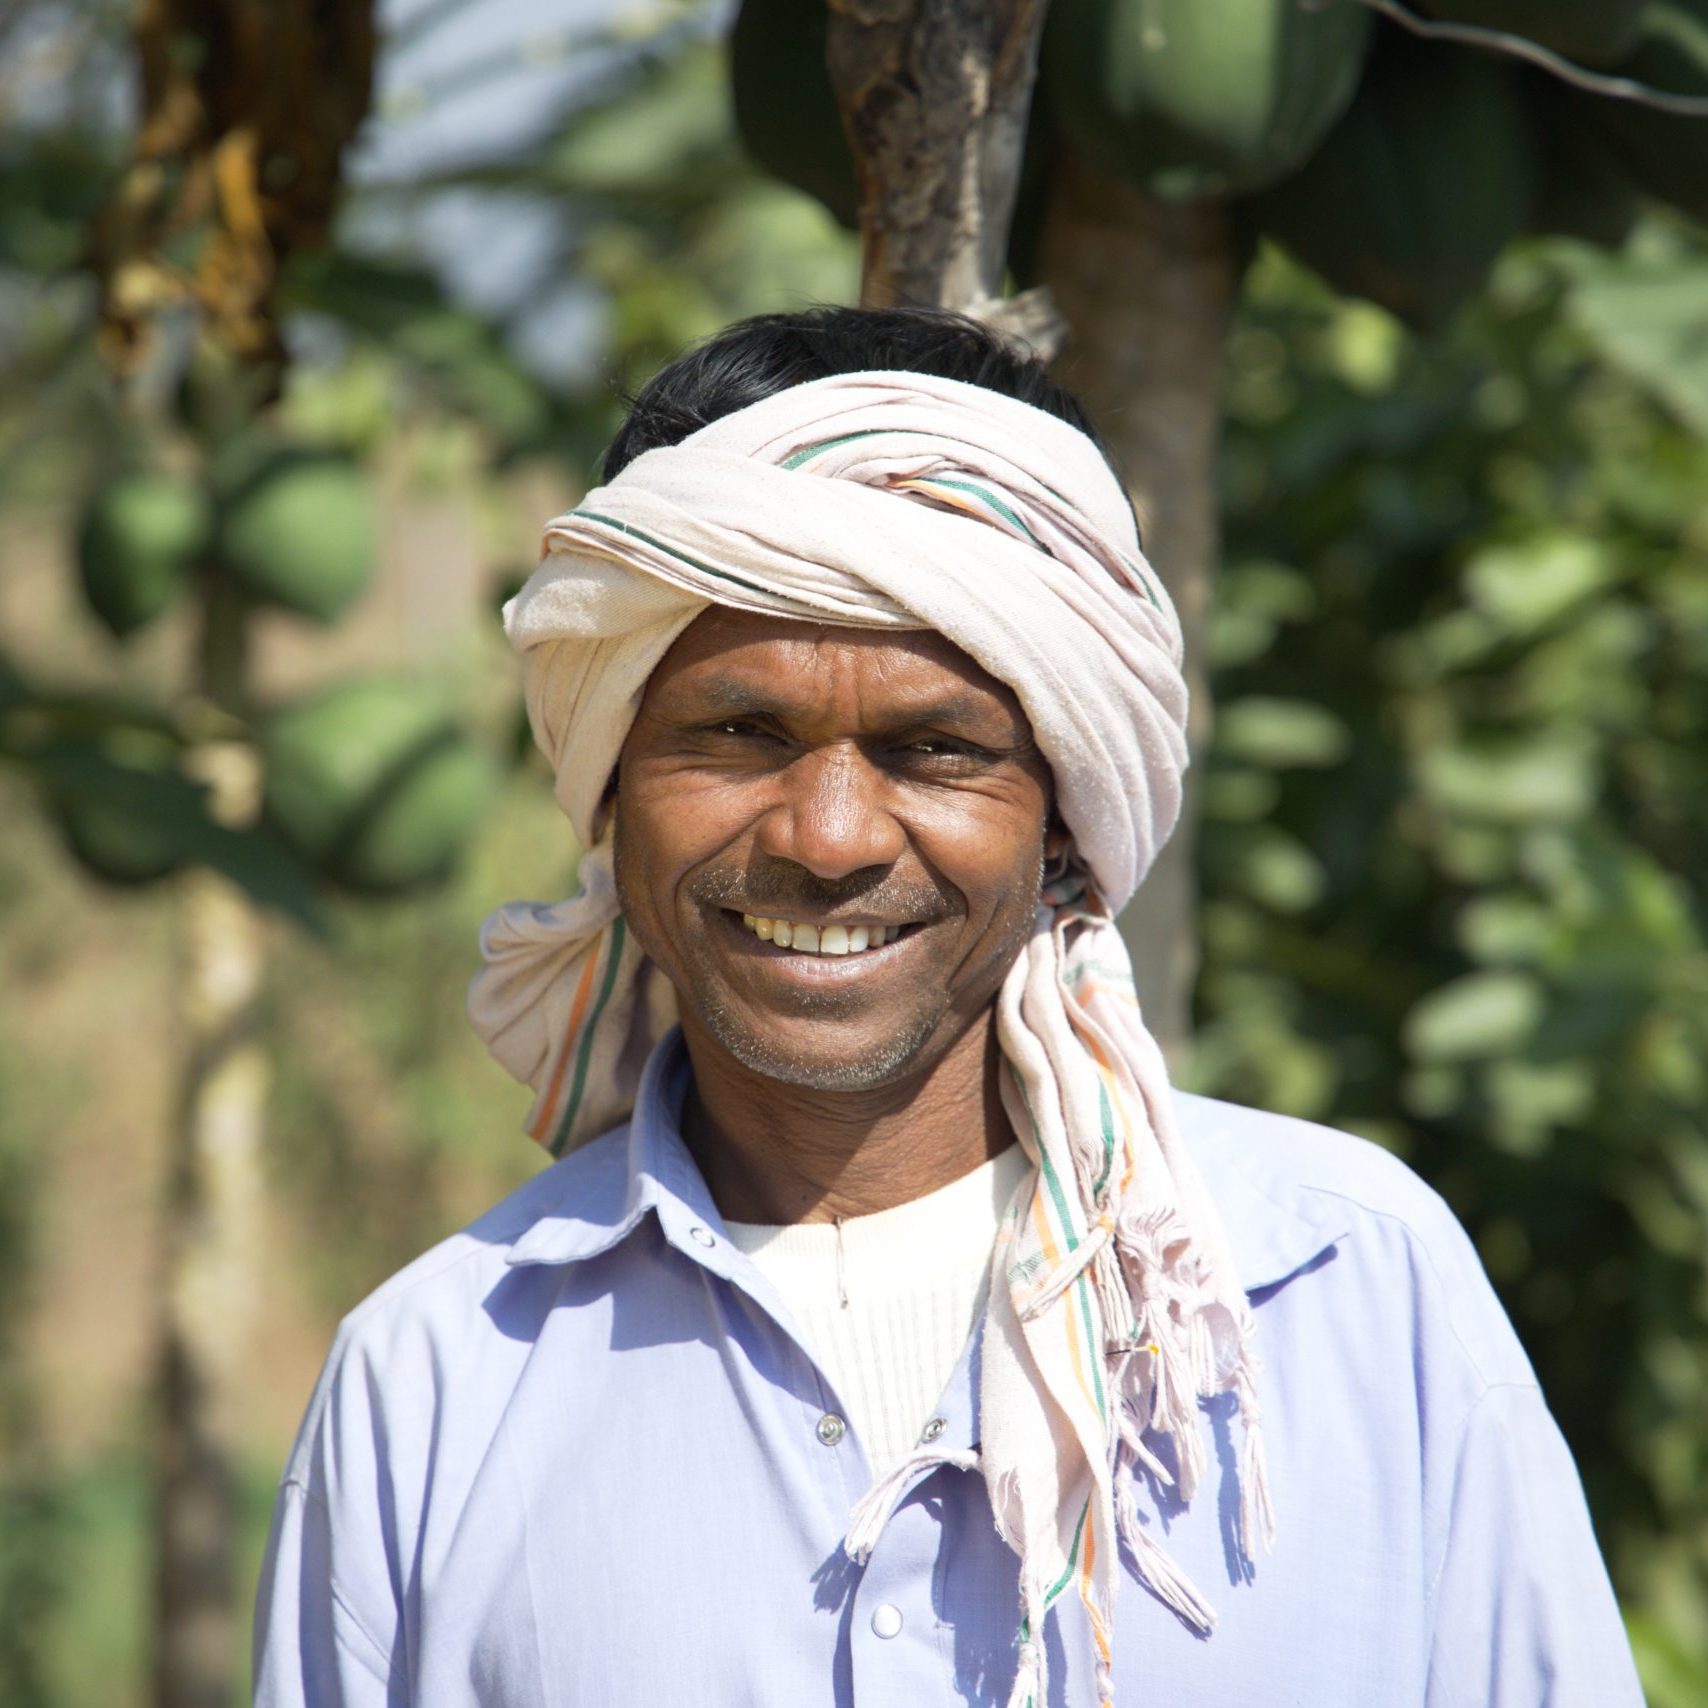 A man with a white head turban smiles at the camera, trees behind him.